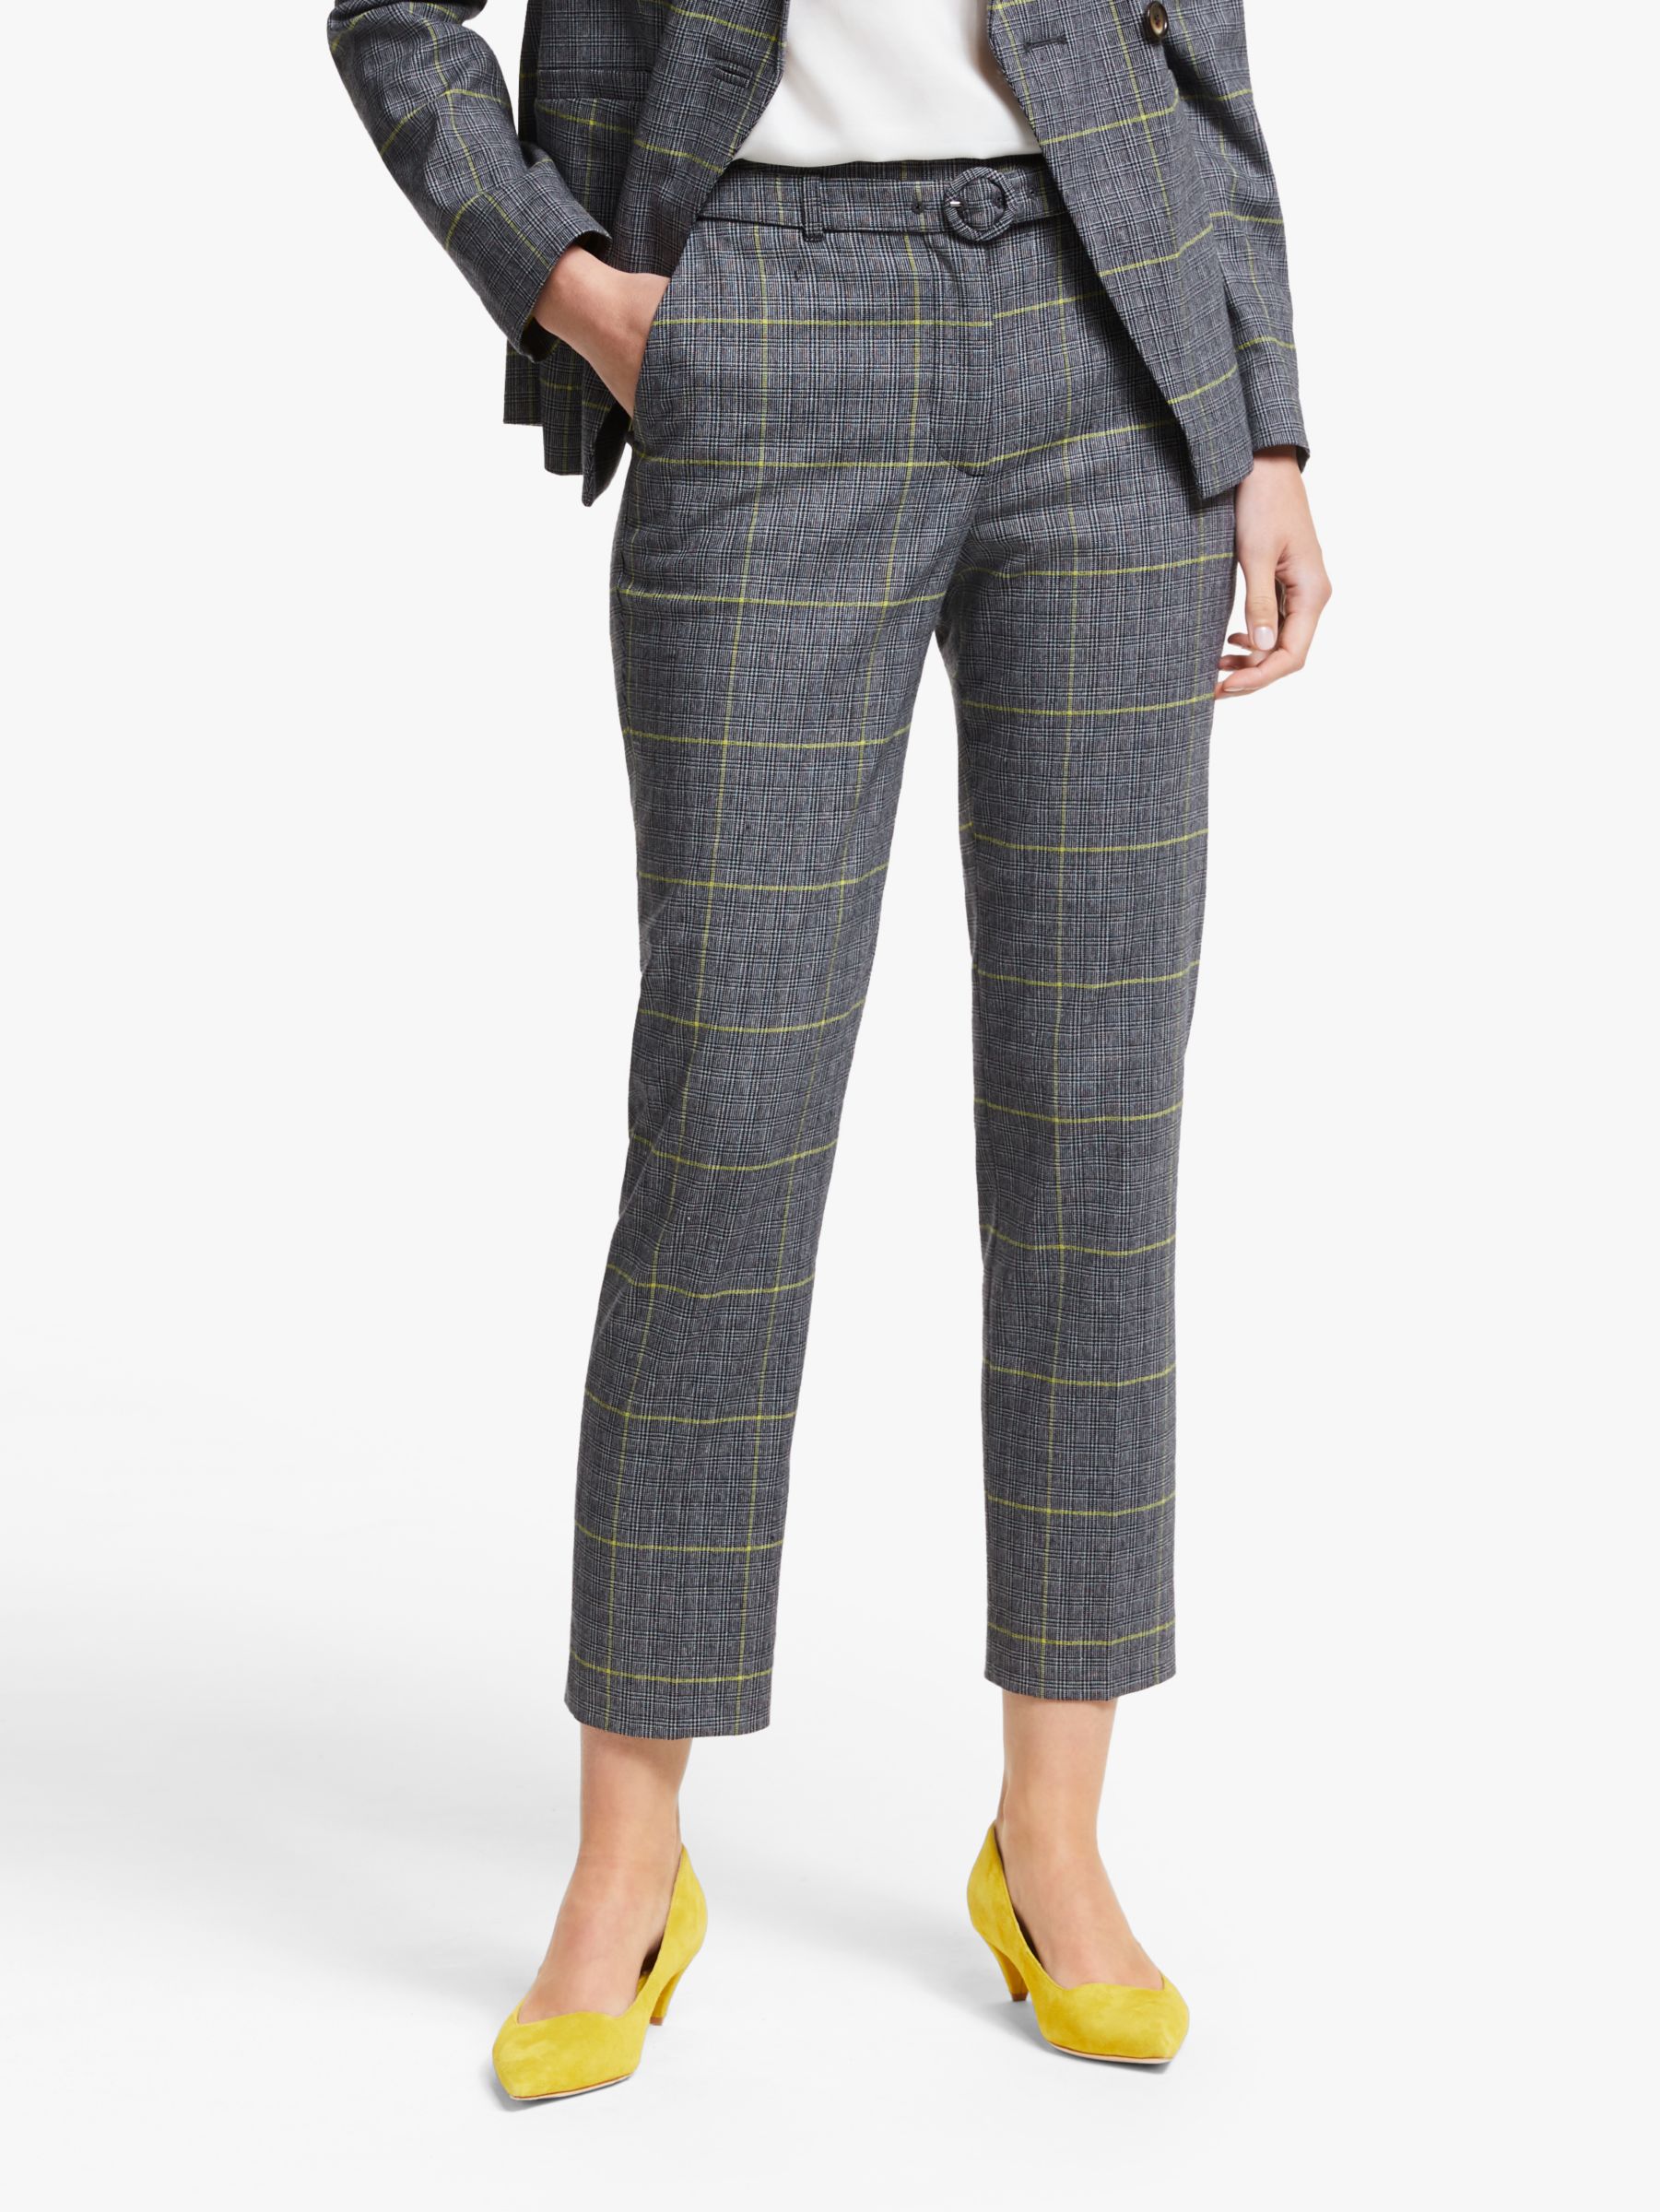 Boden Malden Tweed Belted Trousers